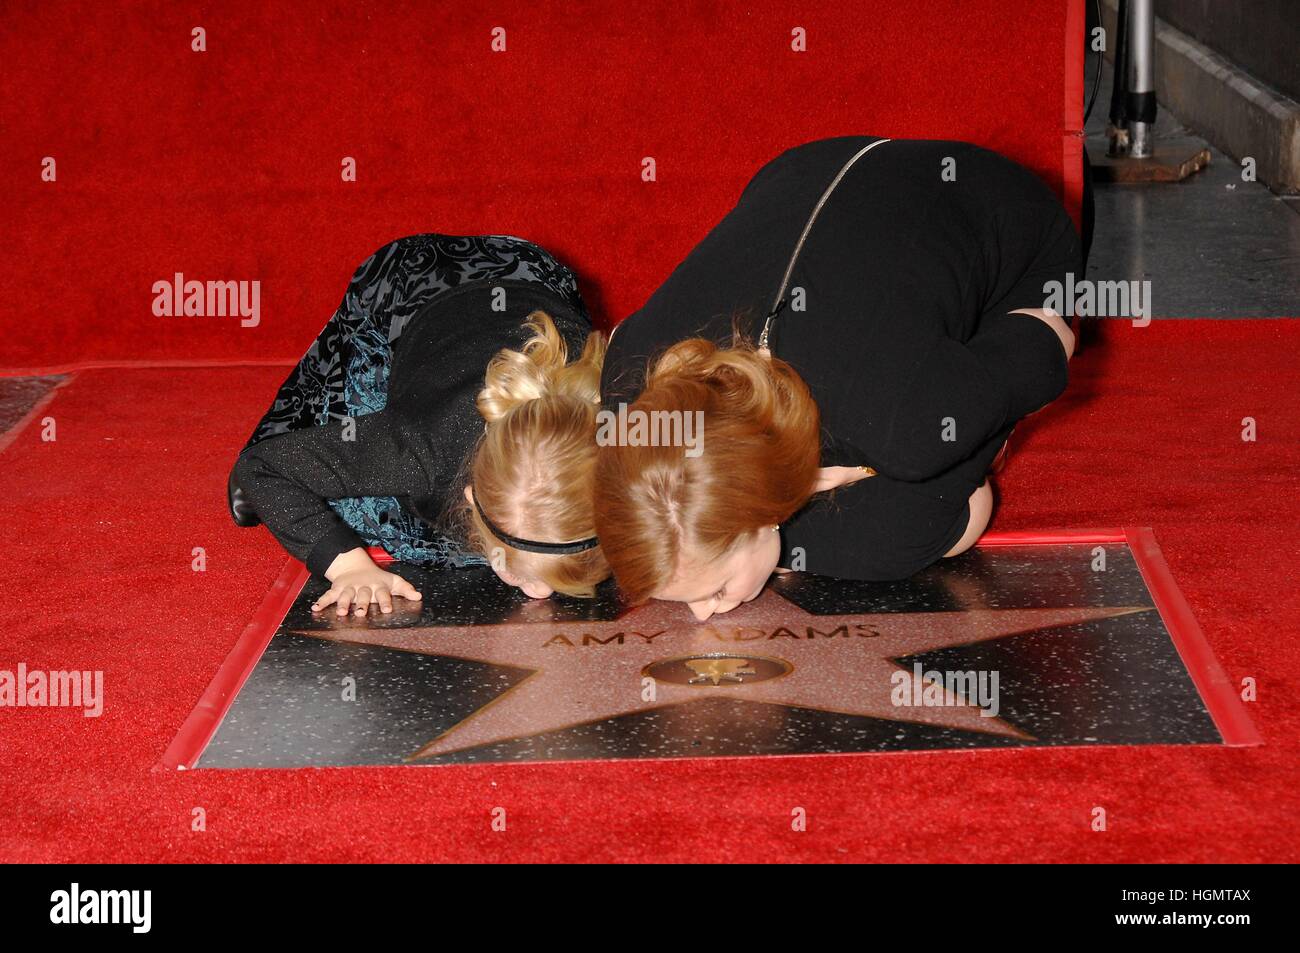 Los Angeles, USA. 11th Jan, 2017. Aviana Olea Le Gallo, Amy Adams at the induction ceremony for Star on the Hollywood Walk of Fame for Amy Adams, Hollywood Boulevard, Los Angeles, CA. Credit: Michael Germana/Everett Collection/Alamy Live News Stock Photo